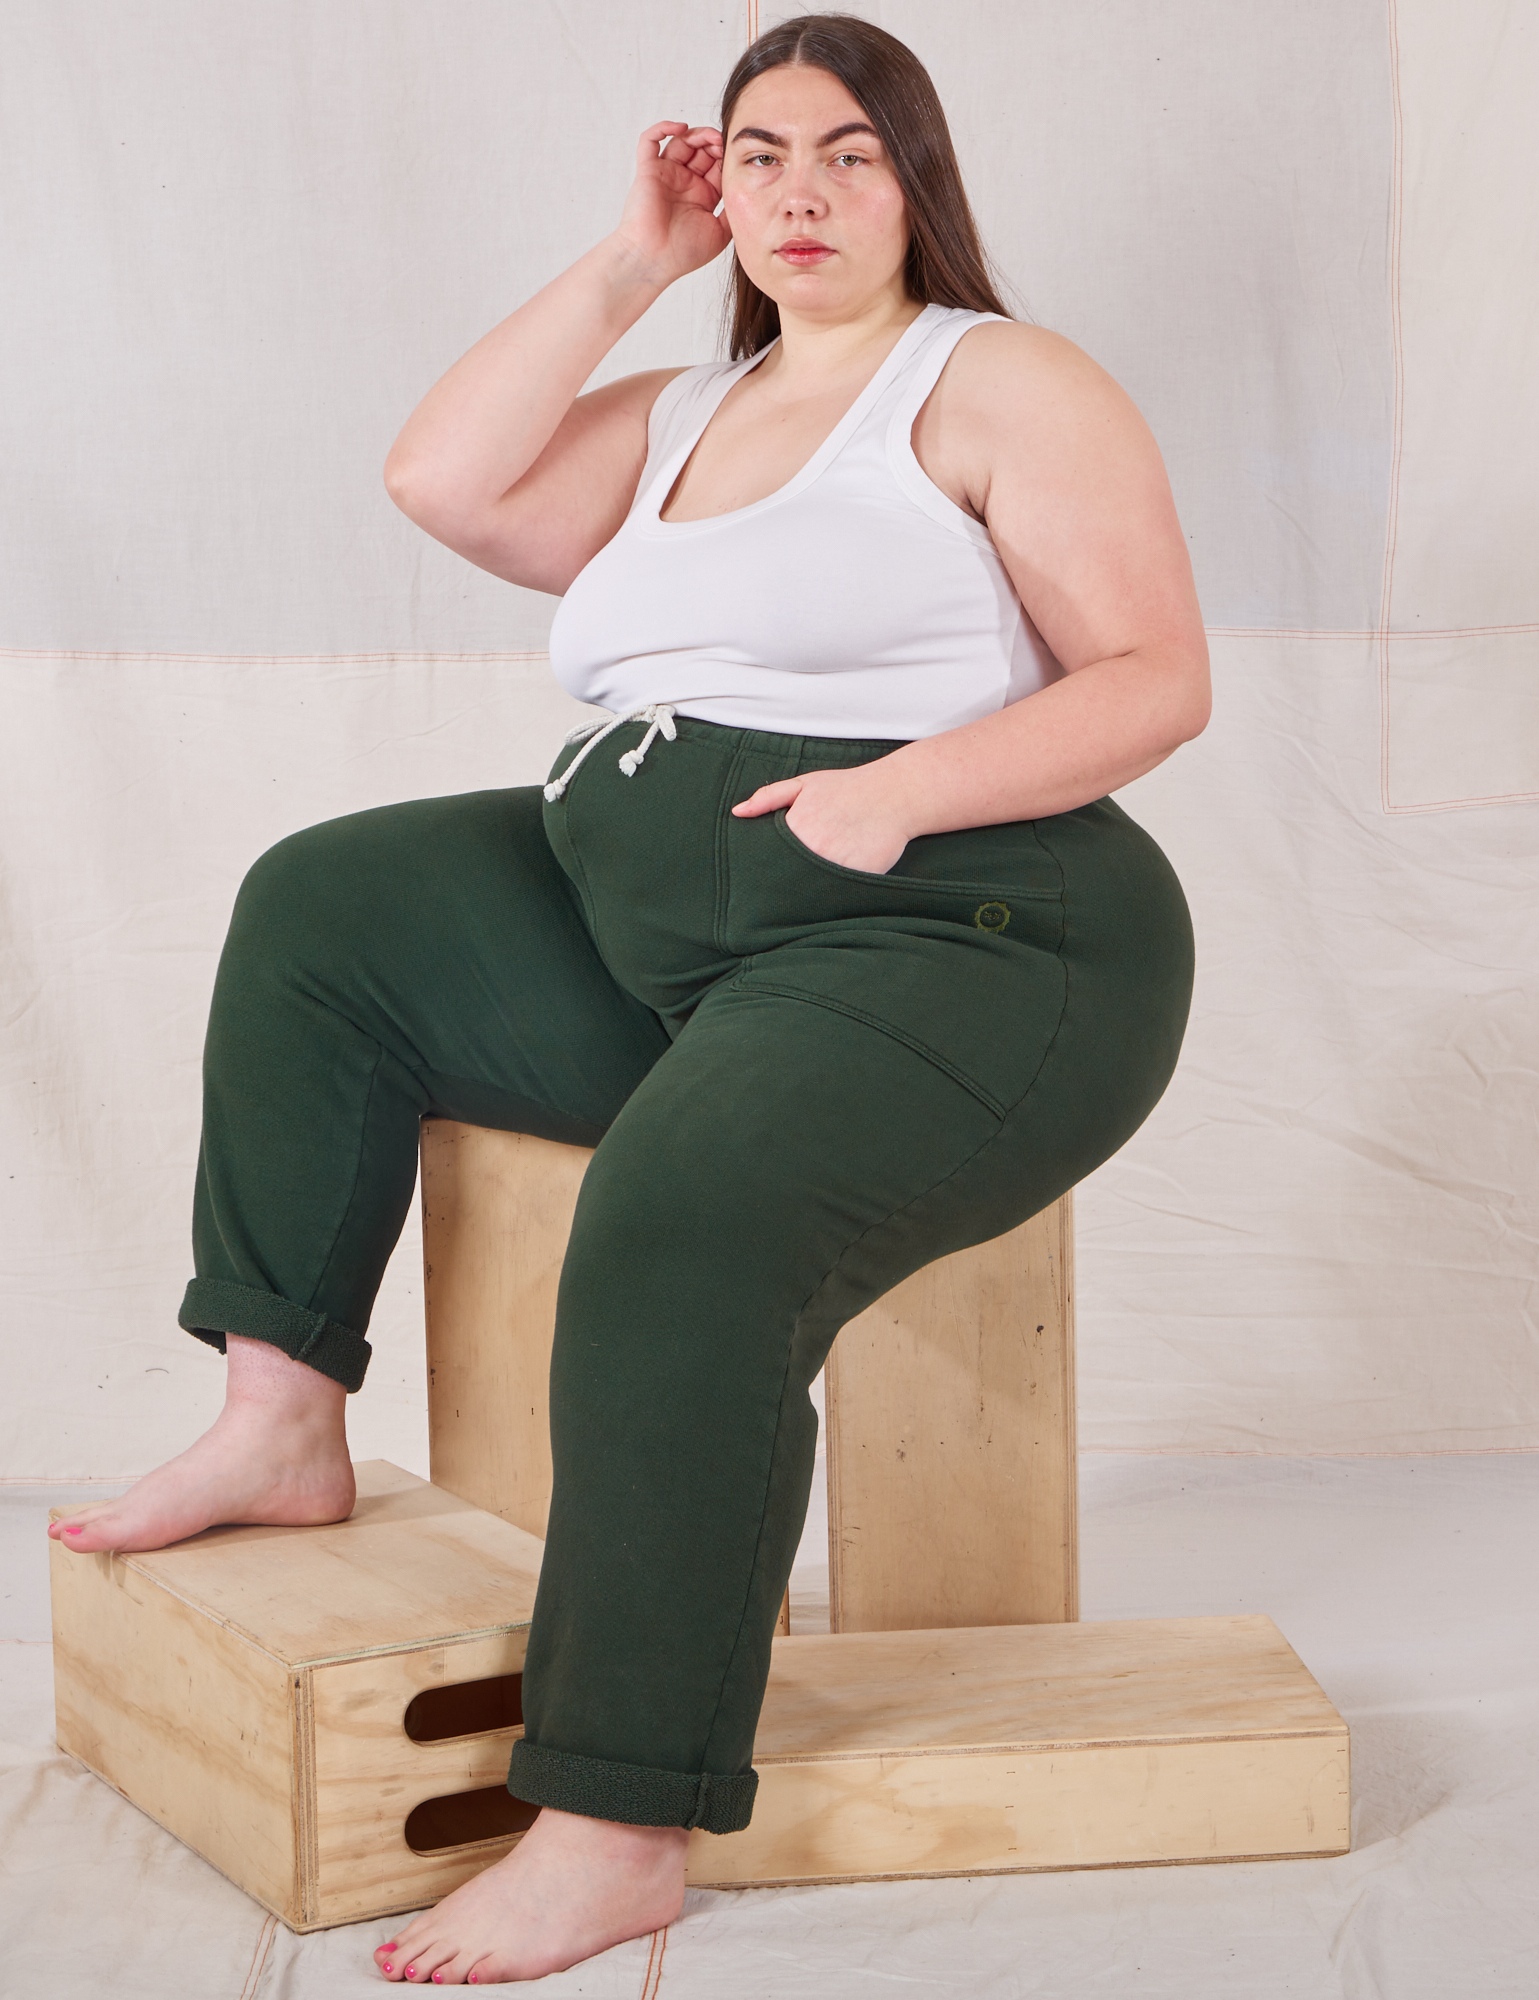 Marielena is wearing Rolled Cuff Sweat Pants in Swamp Green paired with vintage off-white Cropped Tank